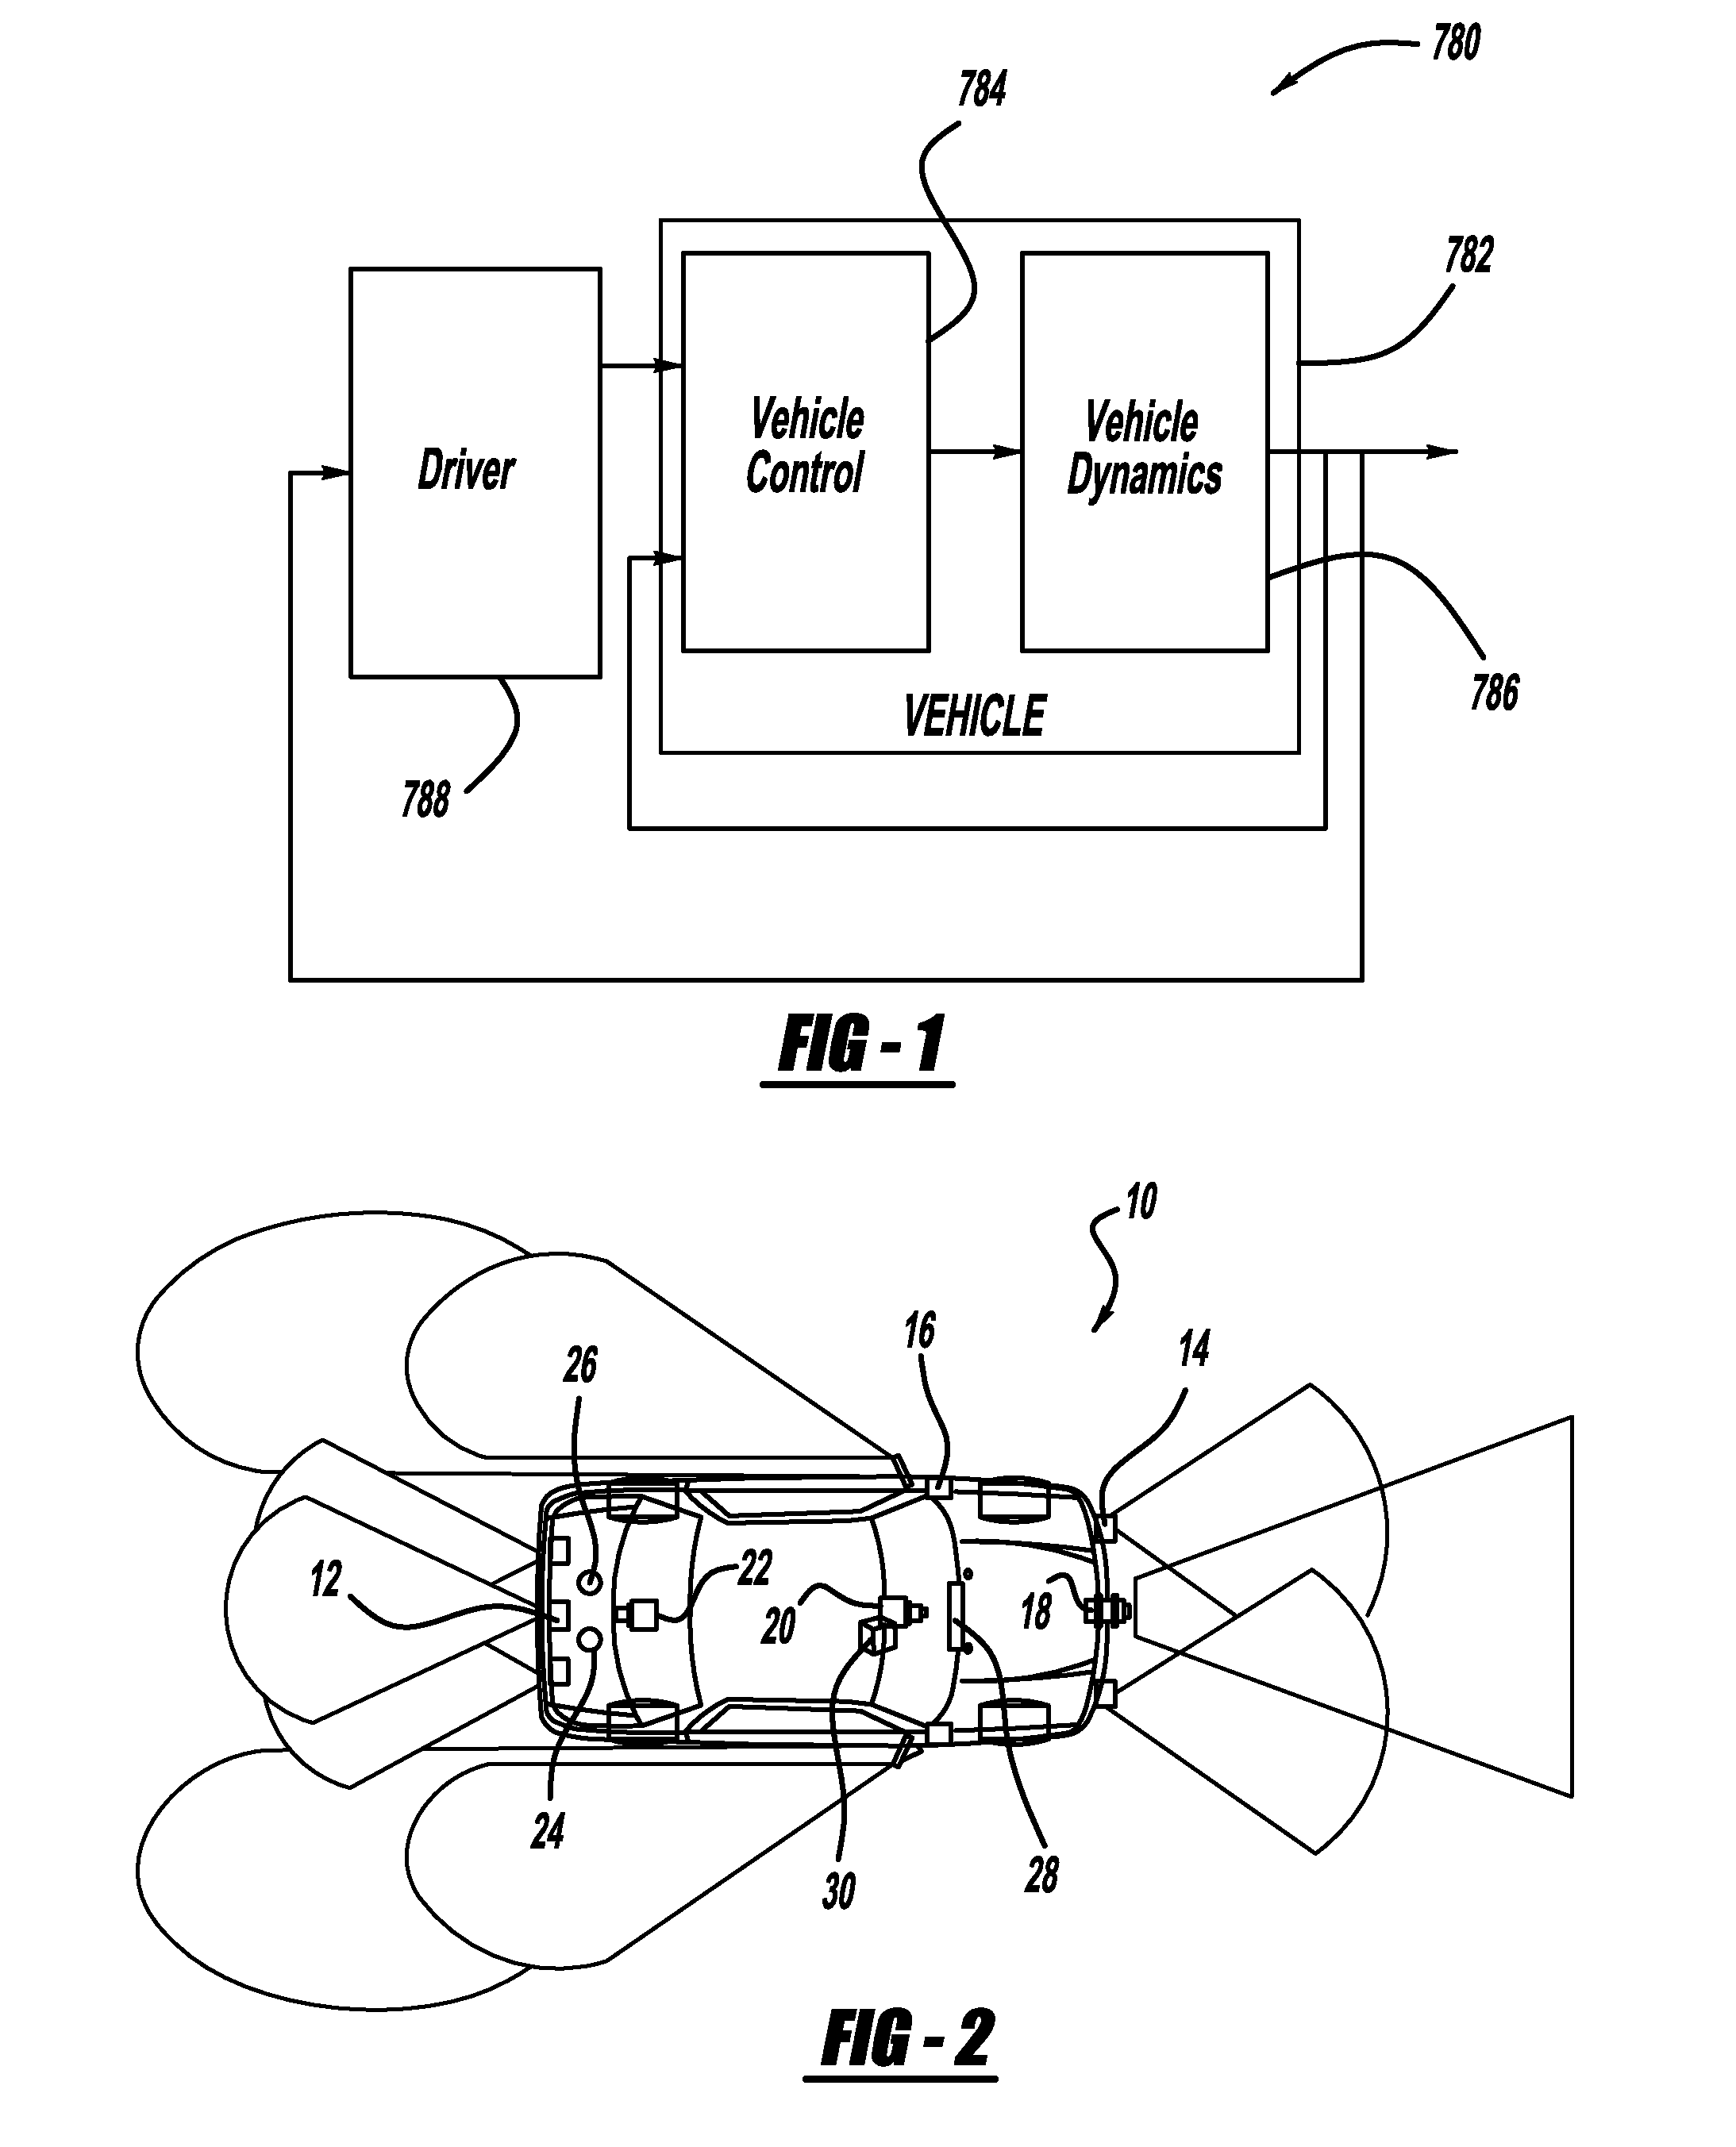 Vehicle stability enhancement control adaptation to driving skill with integrated driving skill recognition